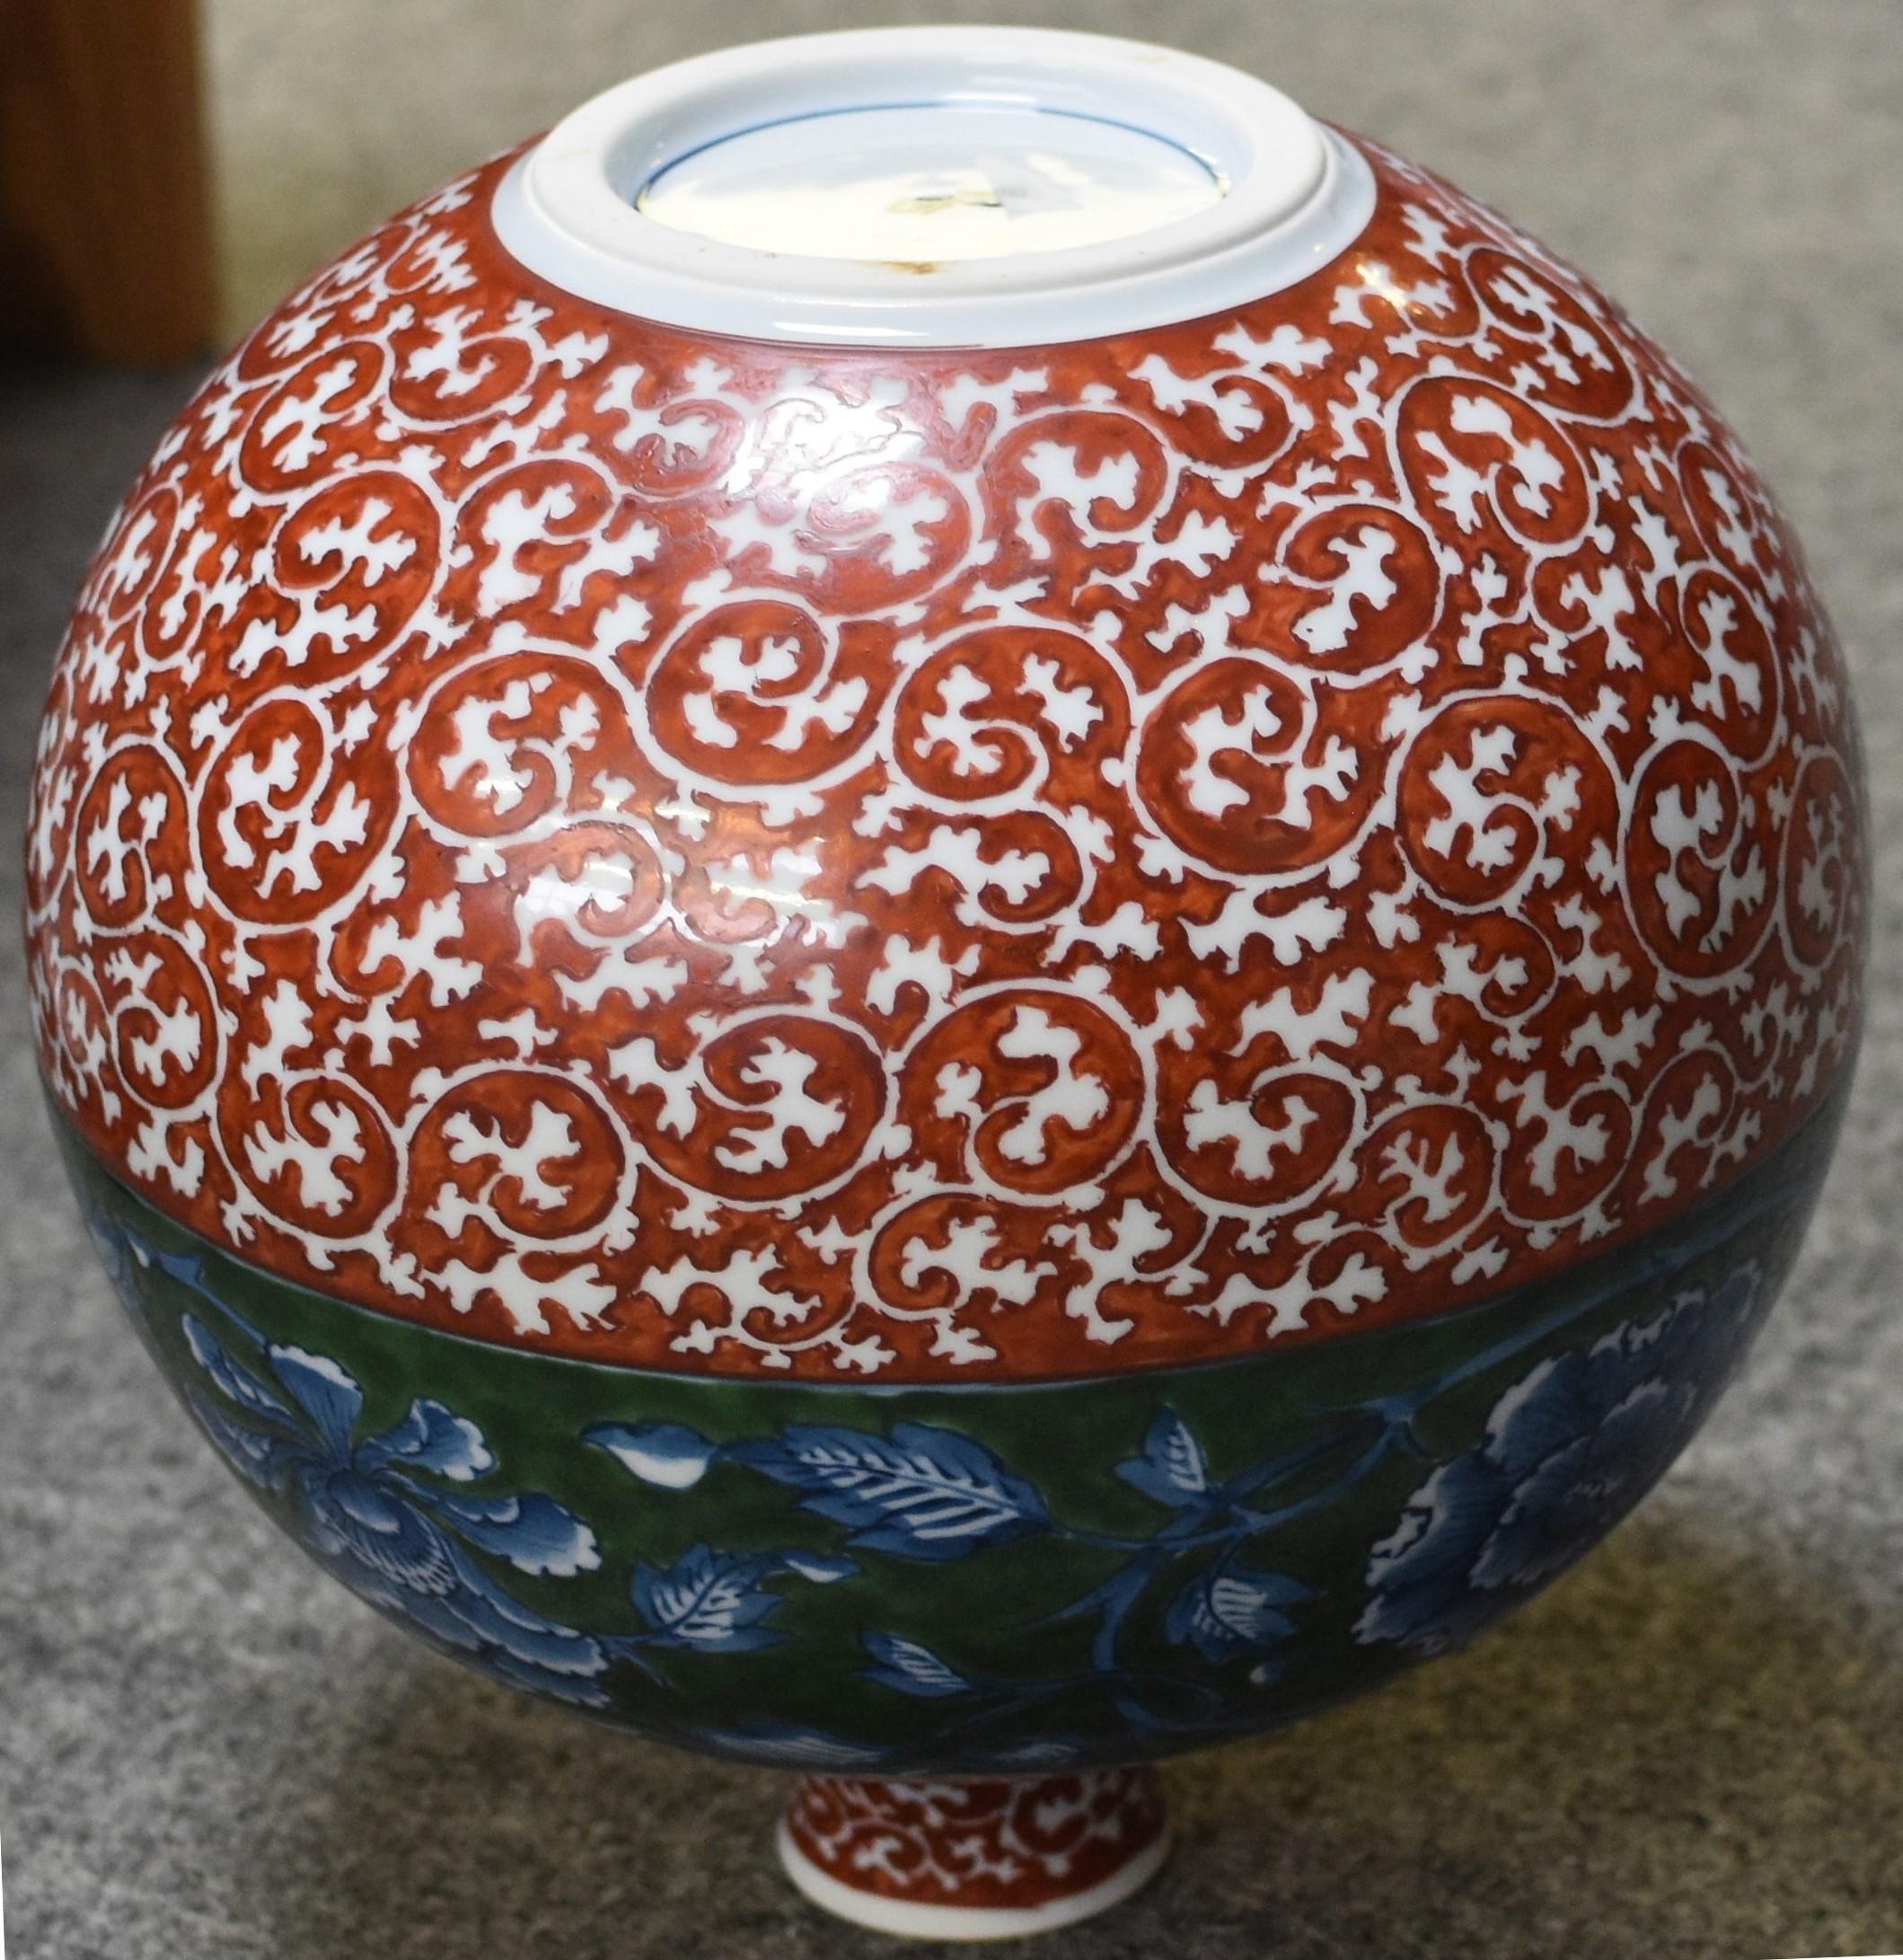 The exquisite vase features an auspicious traditional Arita arabesque or karakusa pattern in deep red. To this, the artist has added a wide green band decorated with bold under glaze flowers that accentuates the elegance of this striking